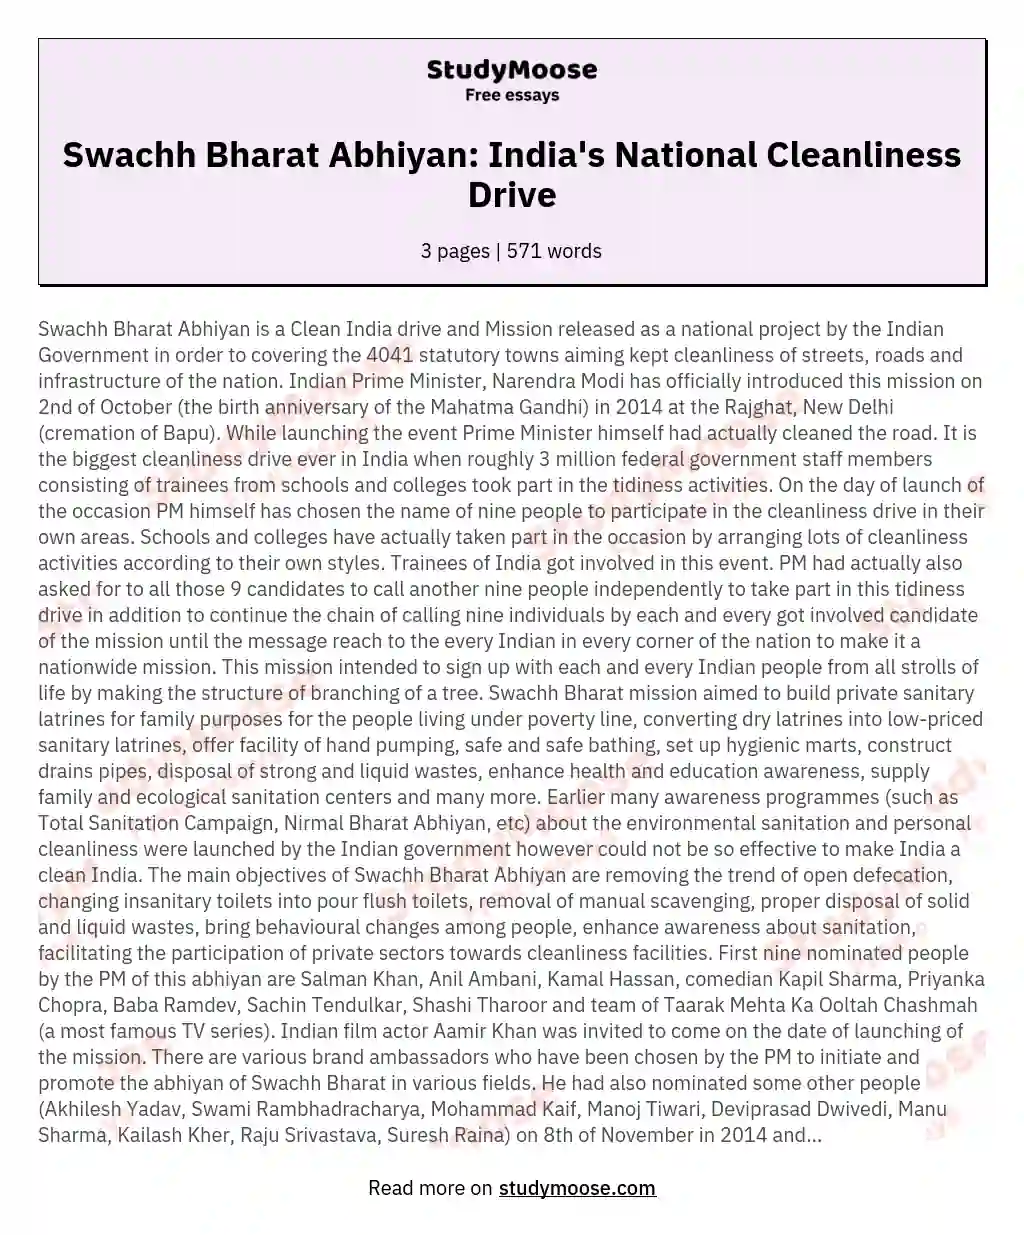 Swachh Bharat Abhiyan: India's National Cleanliness Drive essay